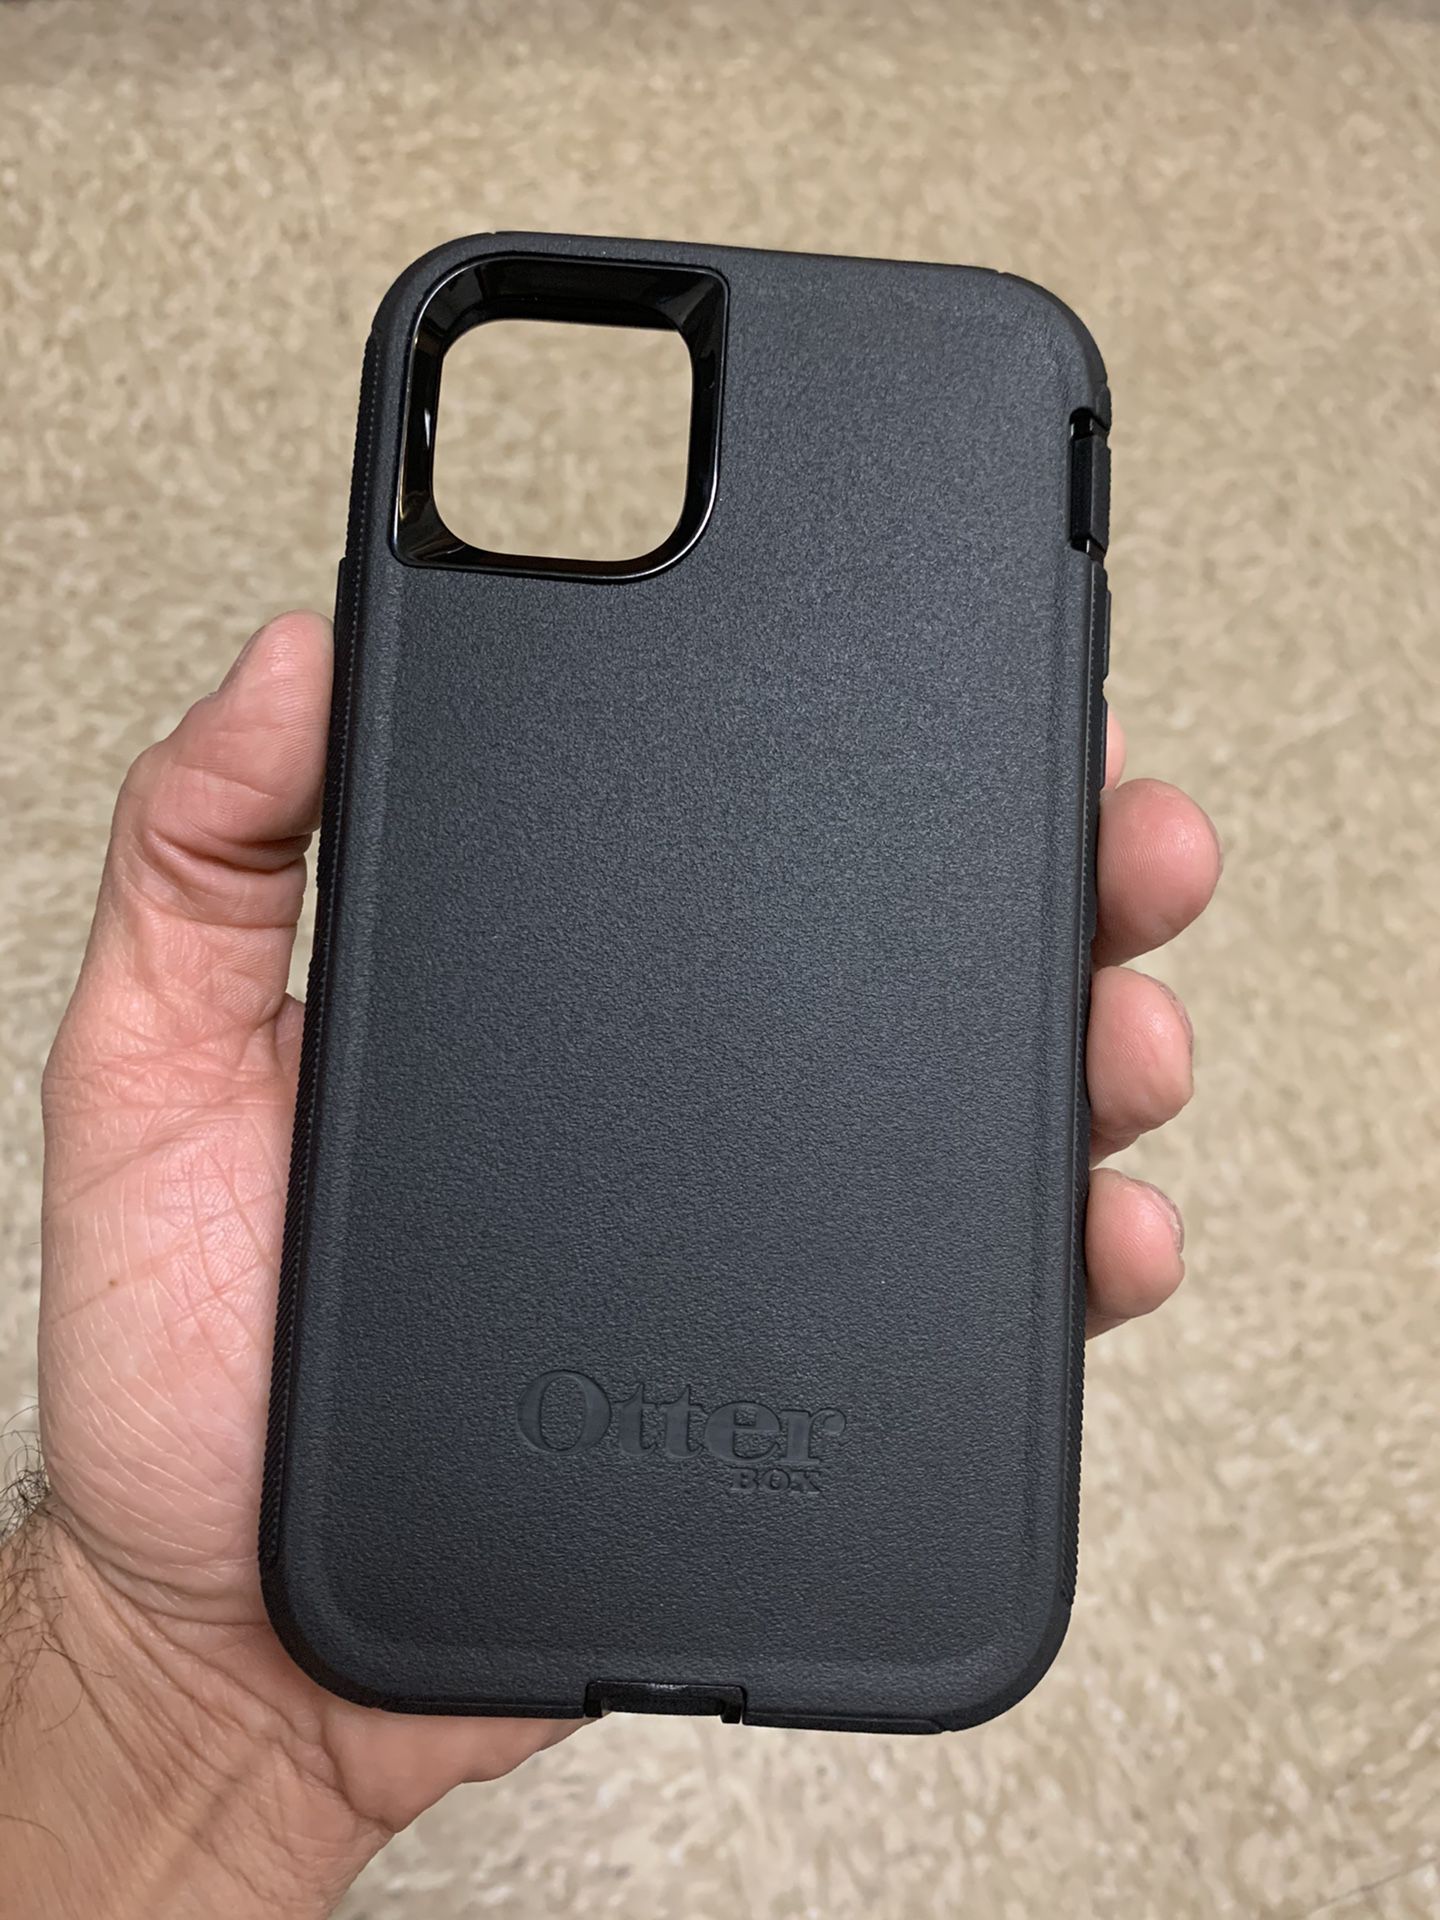 FOR IPHONE 11 PRO MAX OTTERBOX CASE BRAND NEW NEVER USED